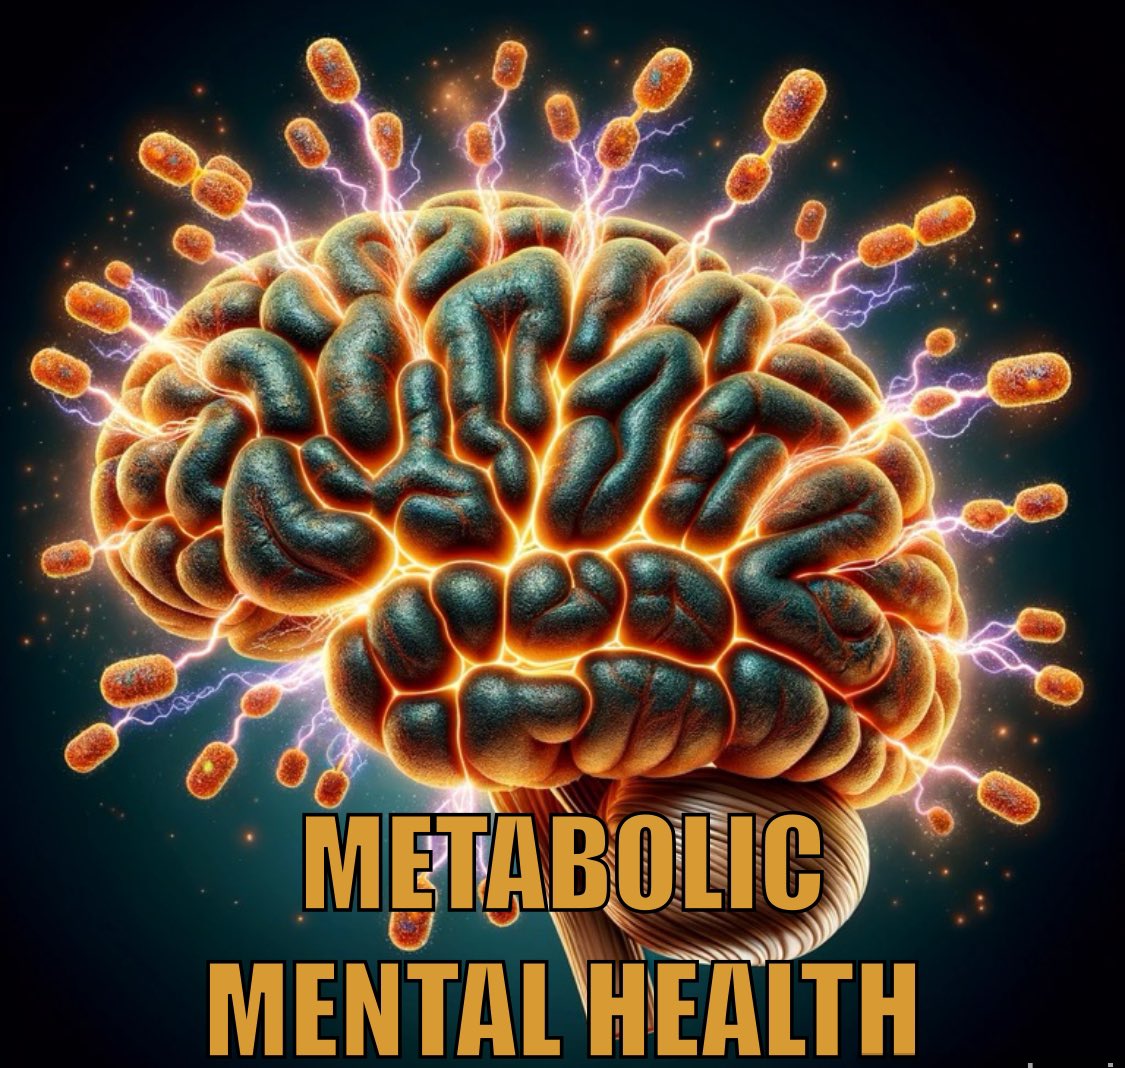 Retweet this if you agree: “Metabolic Health is foundational to Mental Health”